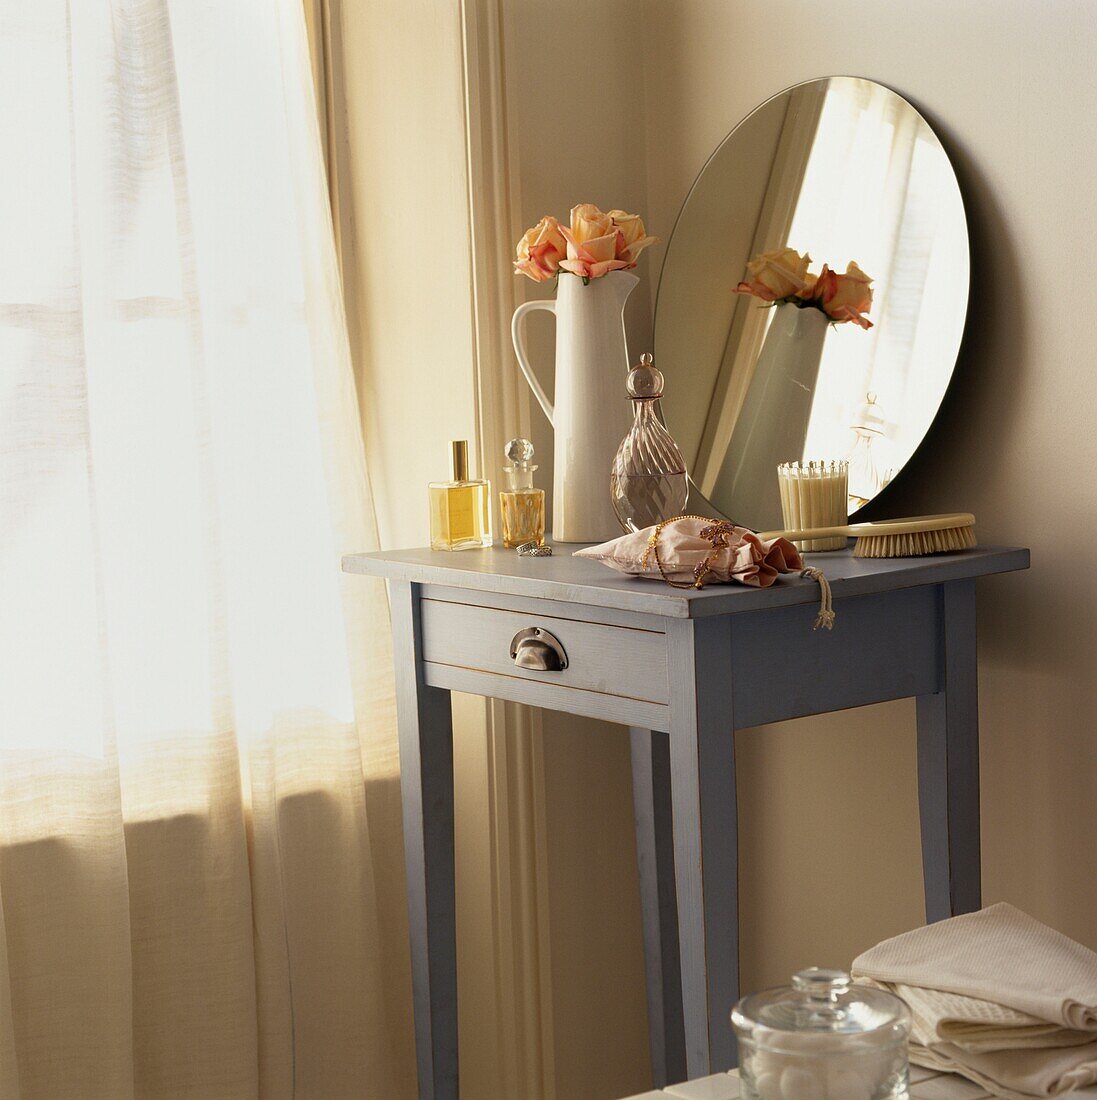 Vase with flowers and circular mirror on painted bedside table at curtained sunlit window